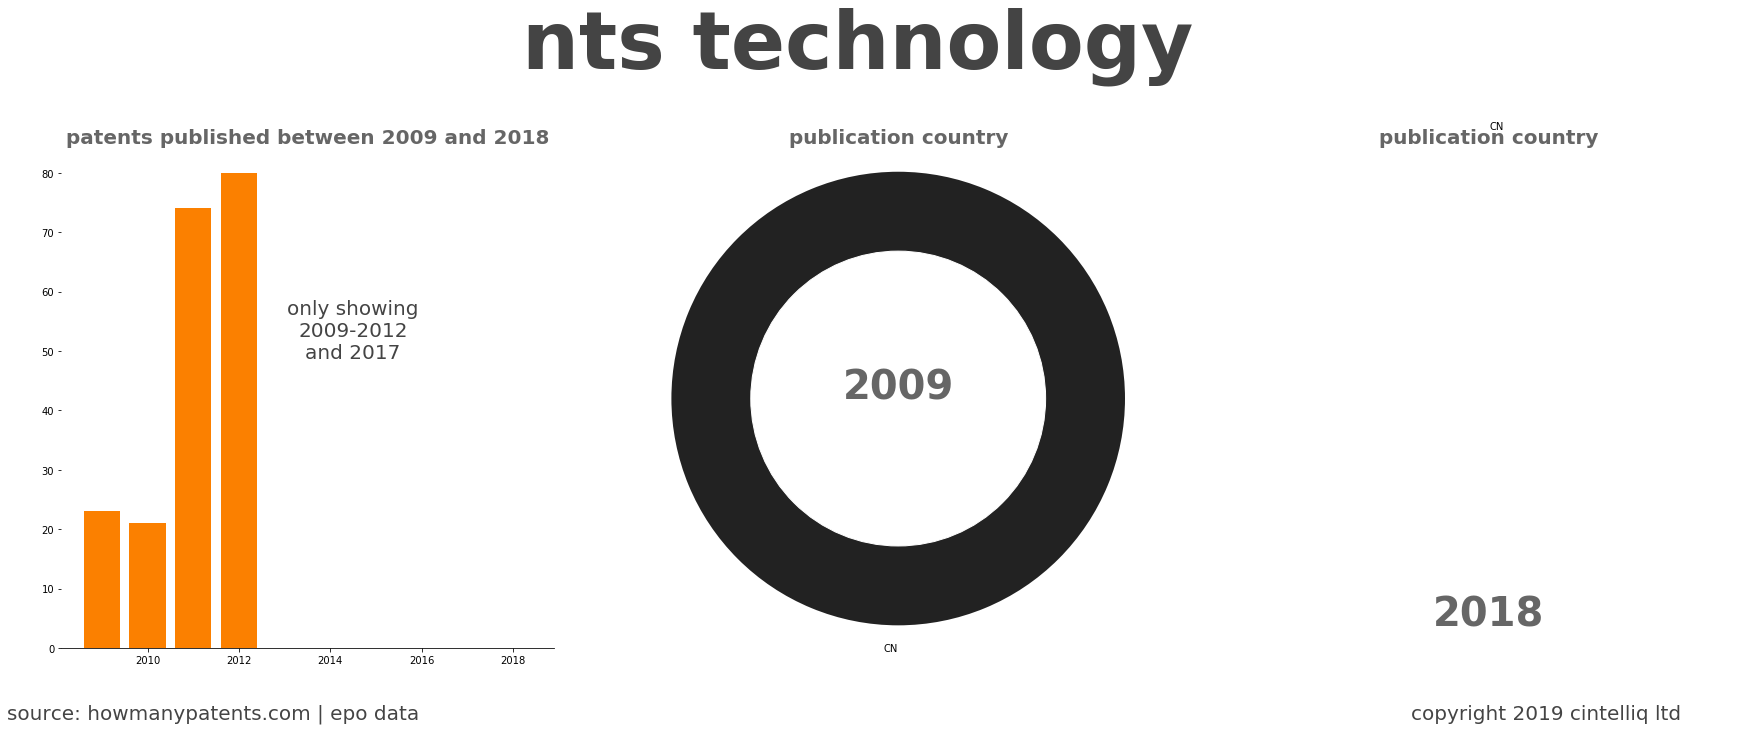 summary of patents for Nts Technology 